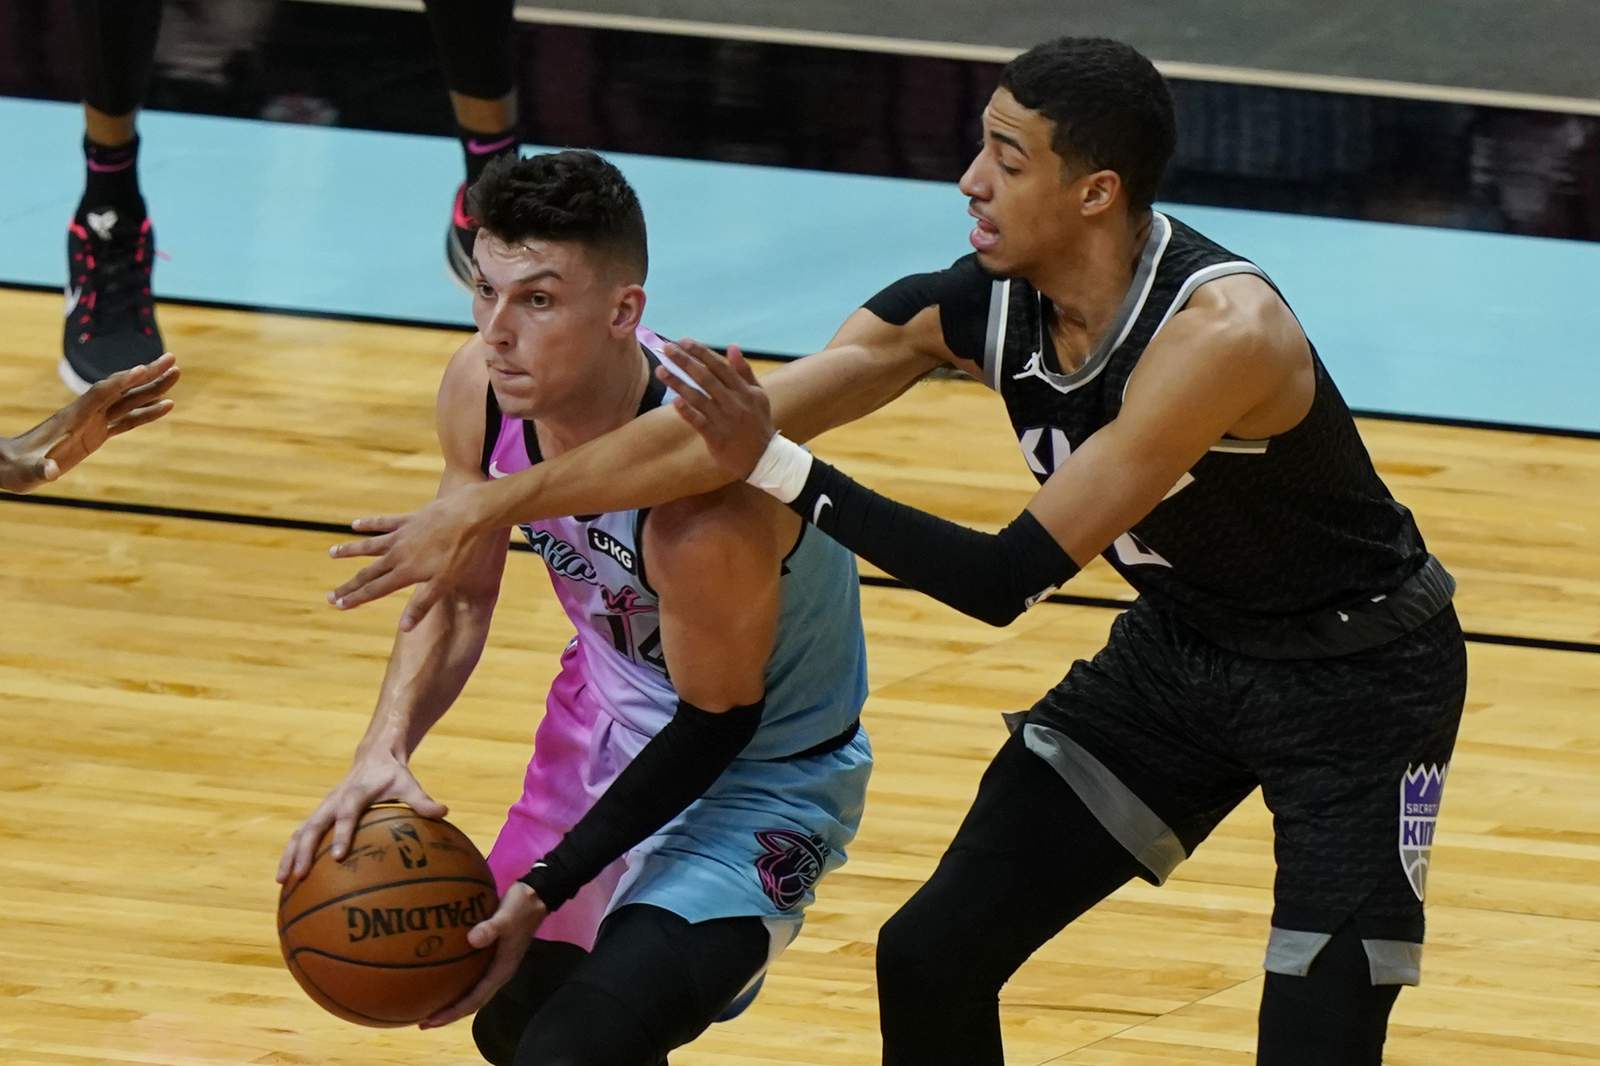 Heat say Herro may miss time for virus-related issue